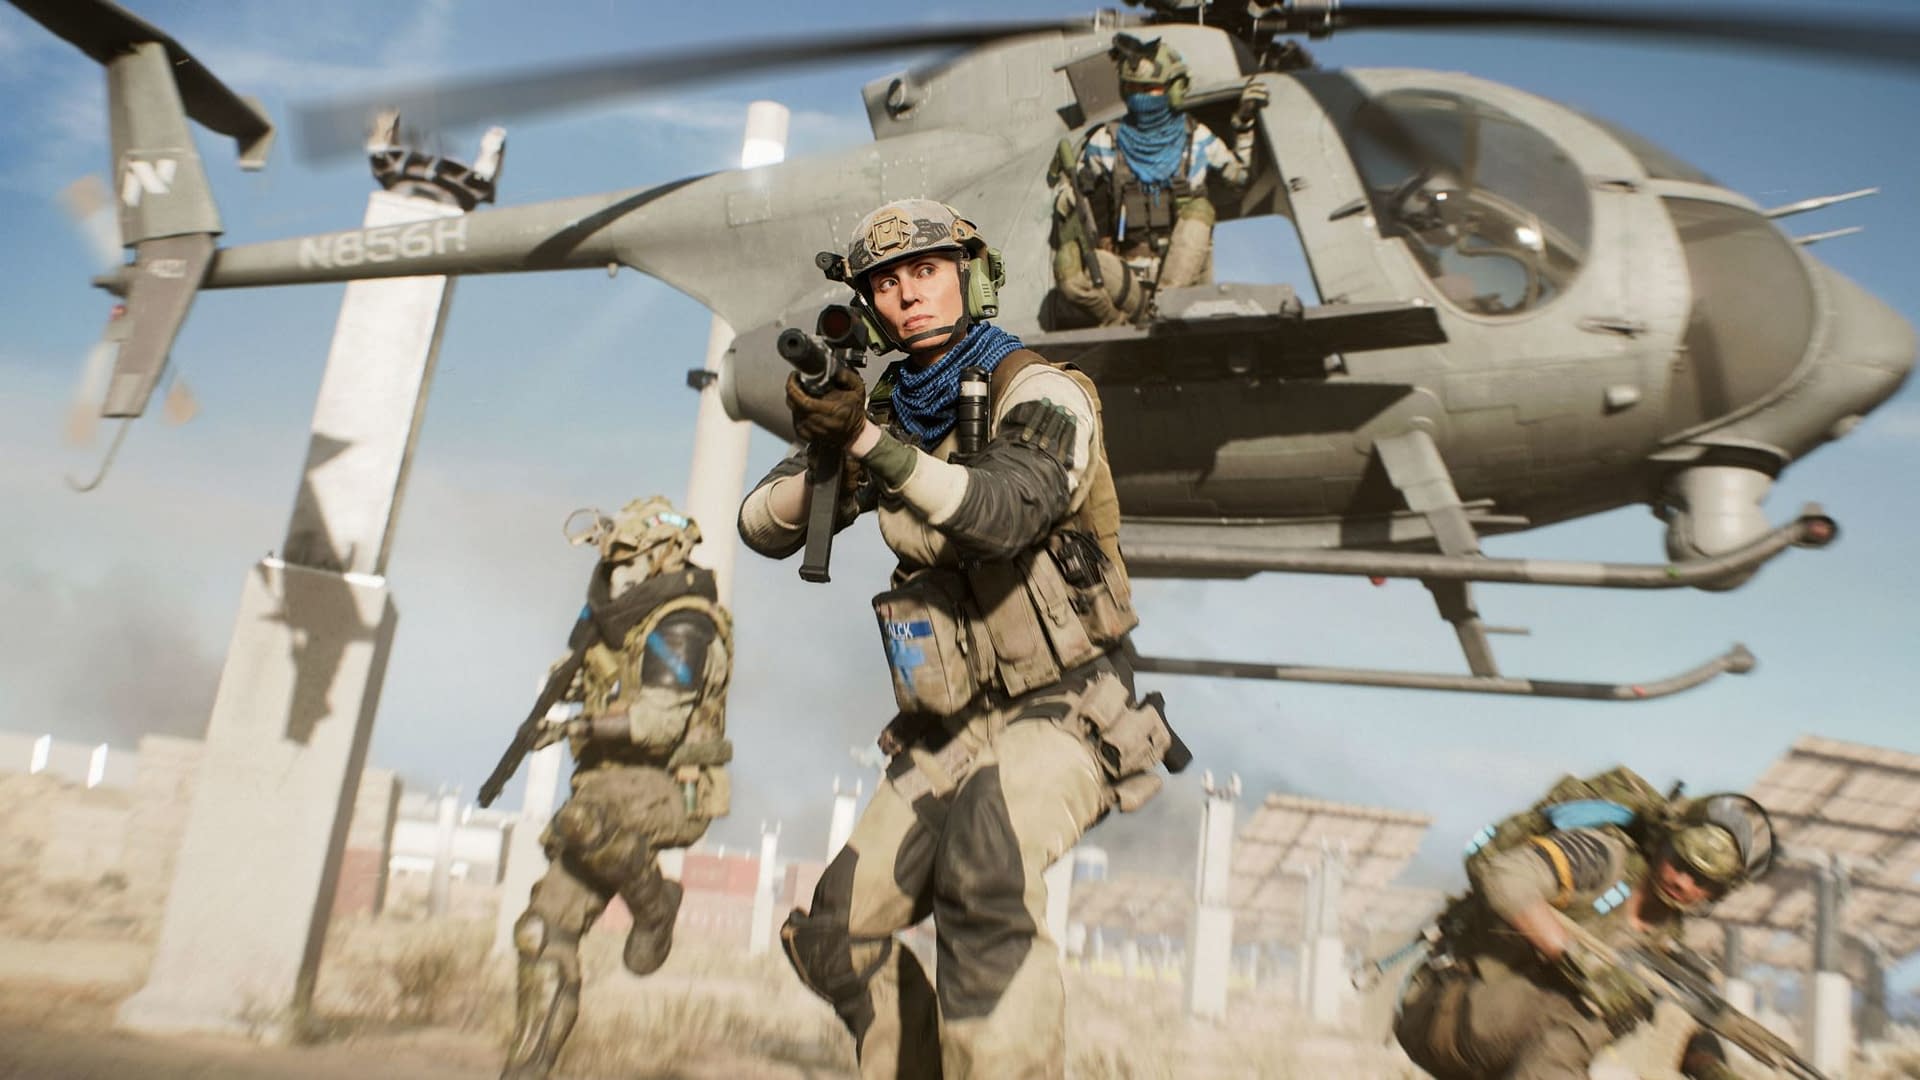 Battlefield 2042' brings players a ton of new guns, armor, and aircraft